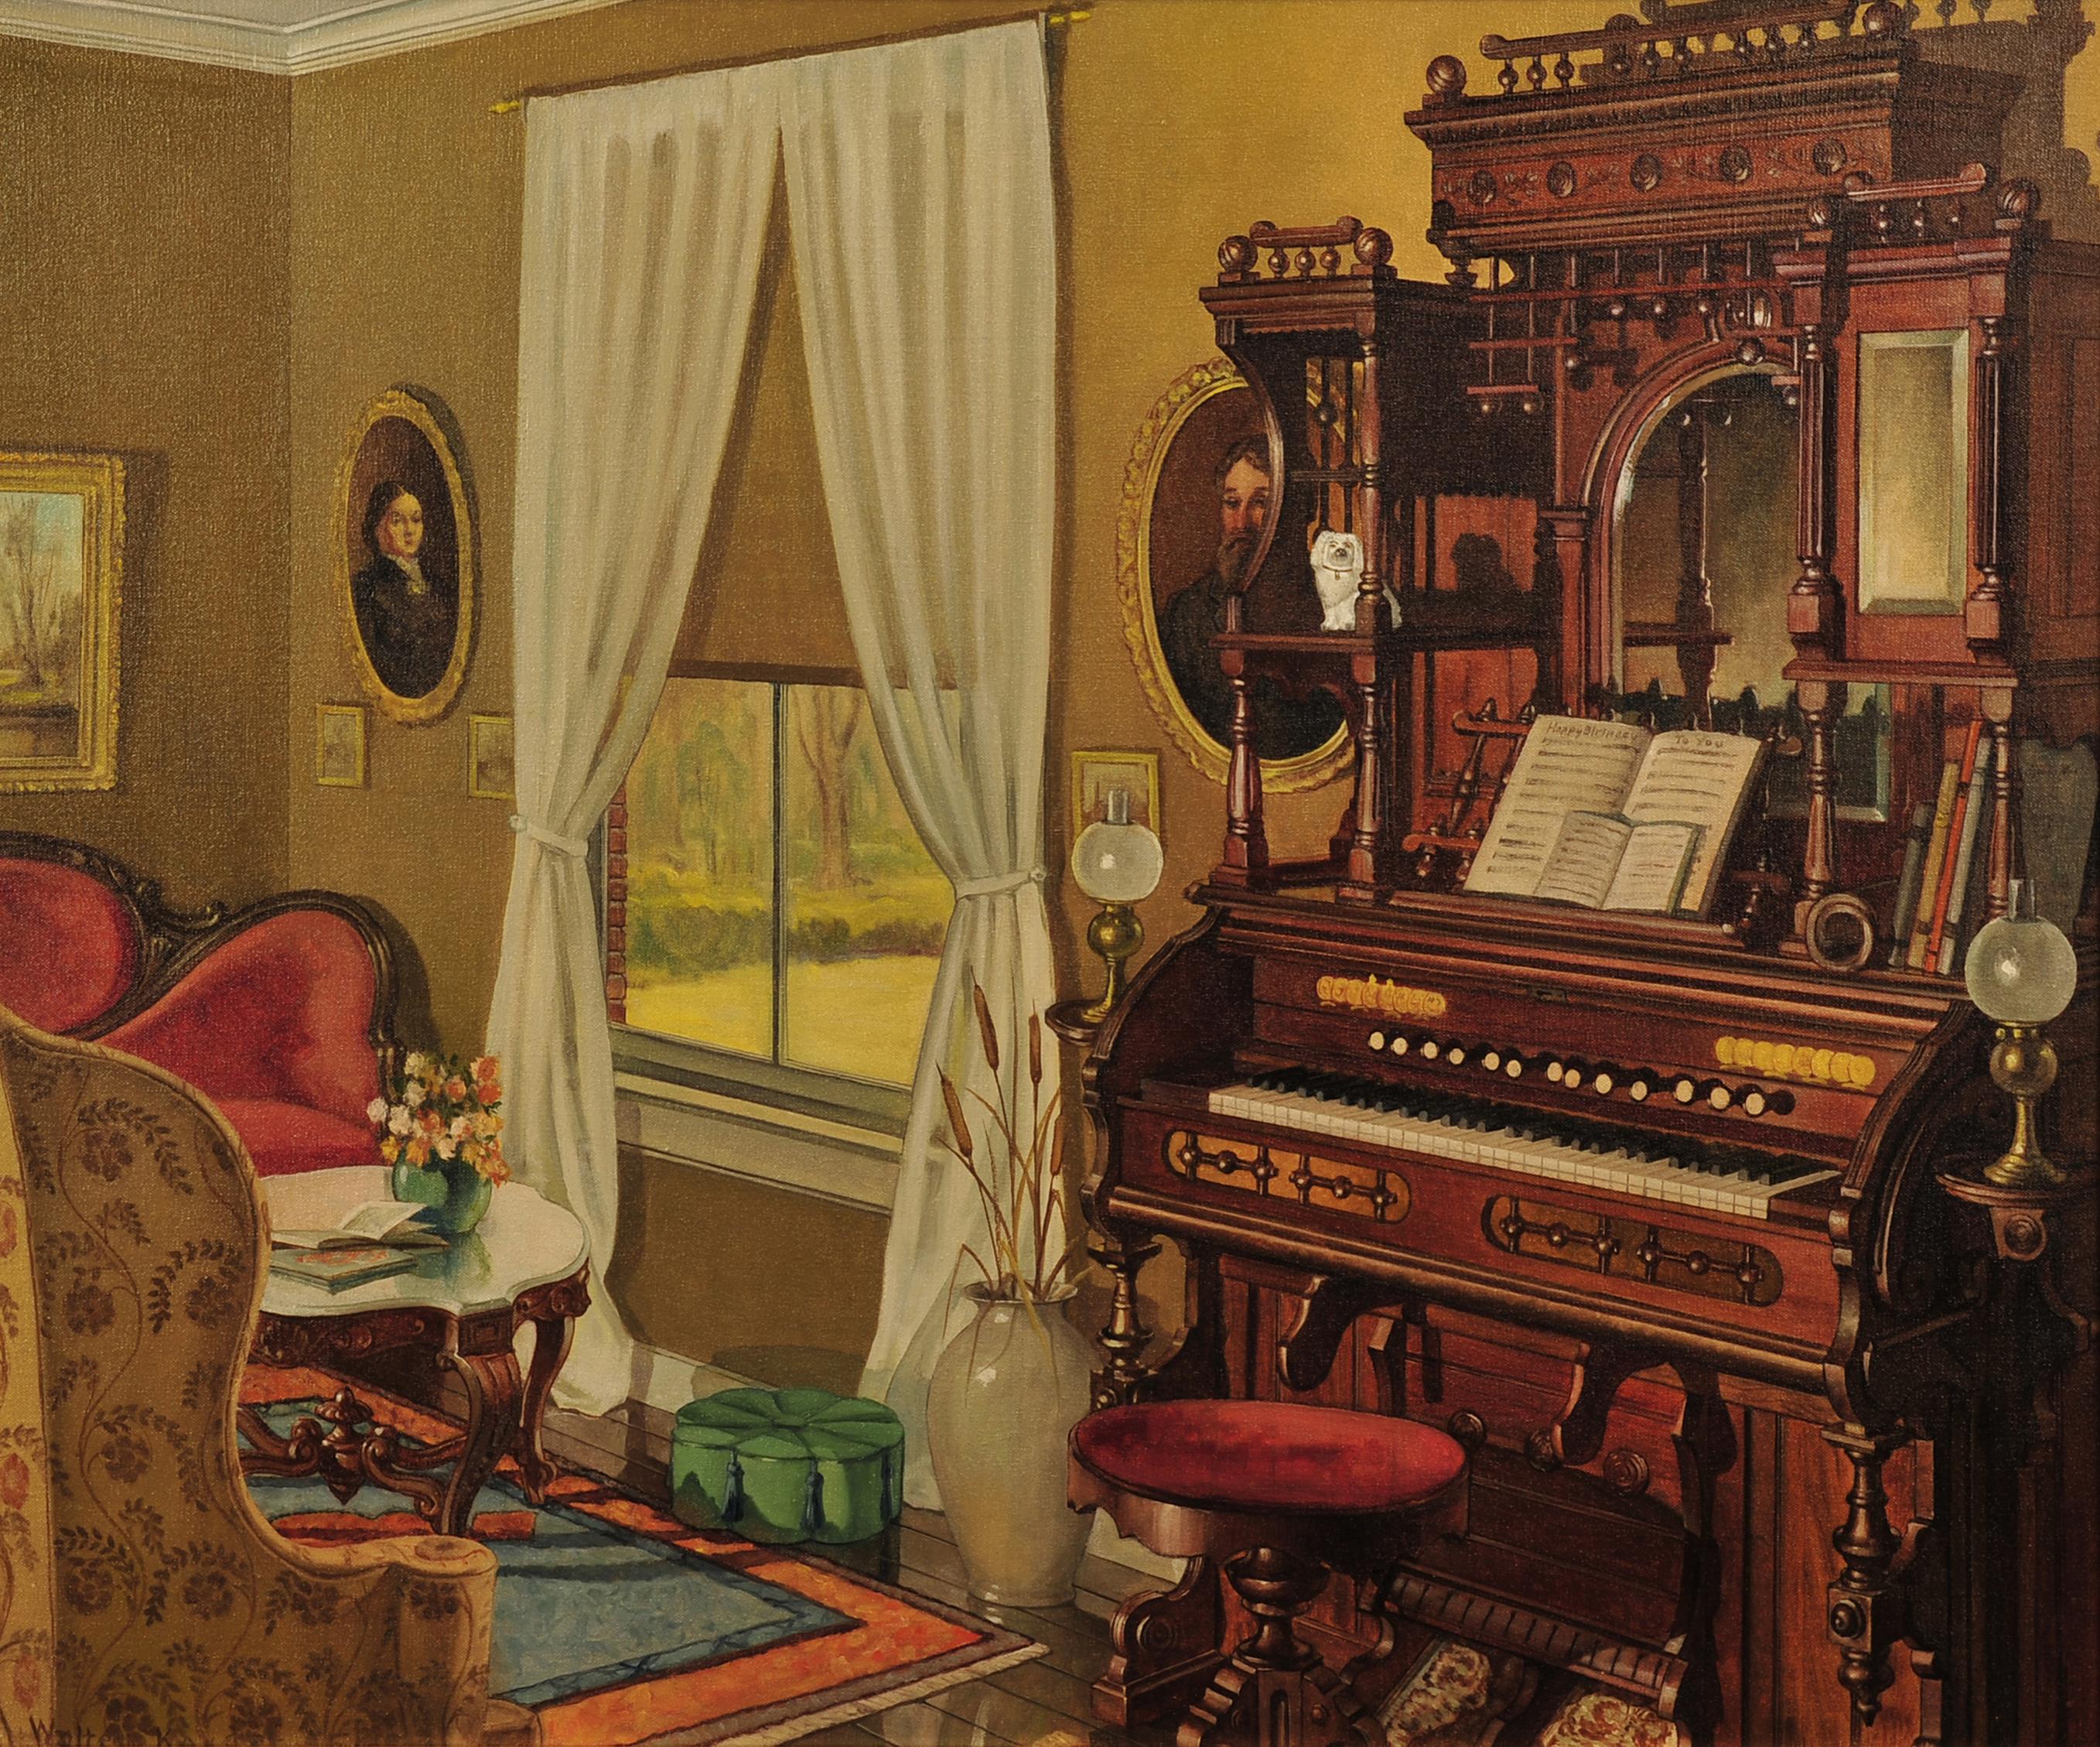 The Parlor Organ - Painting by Walter Korder